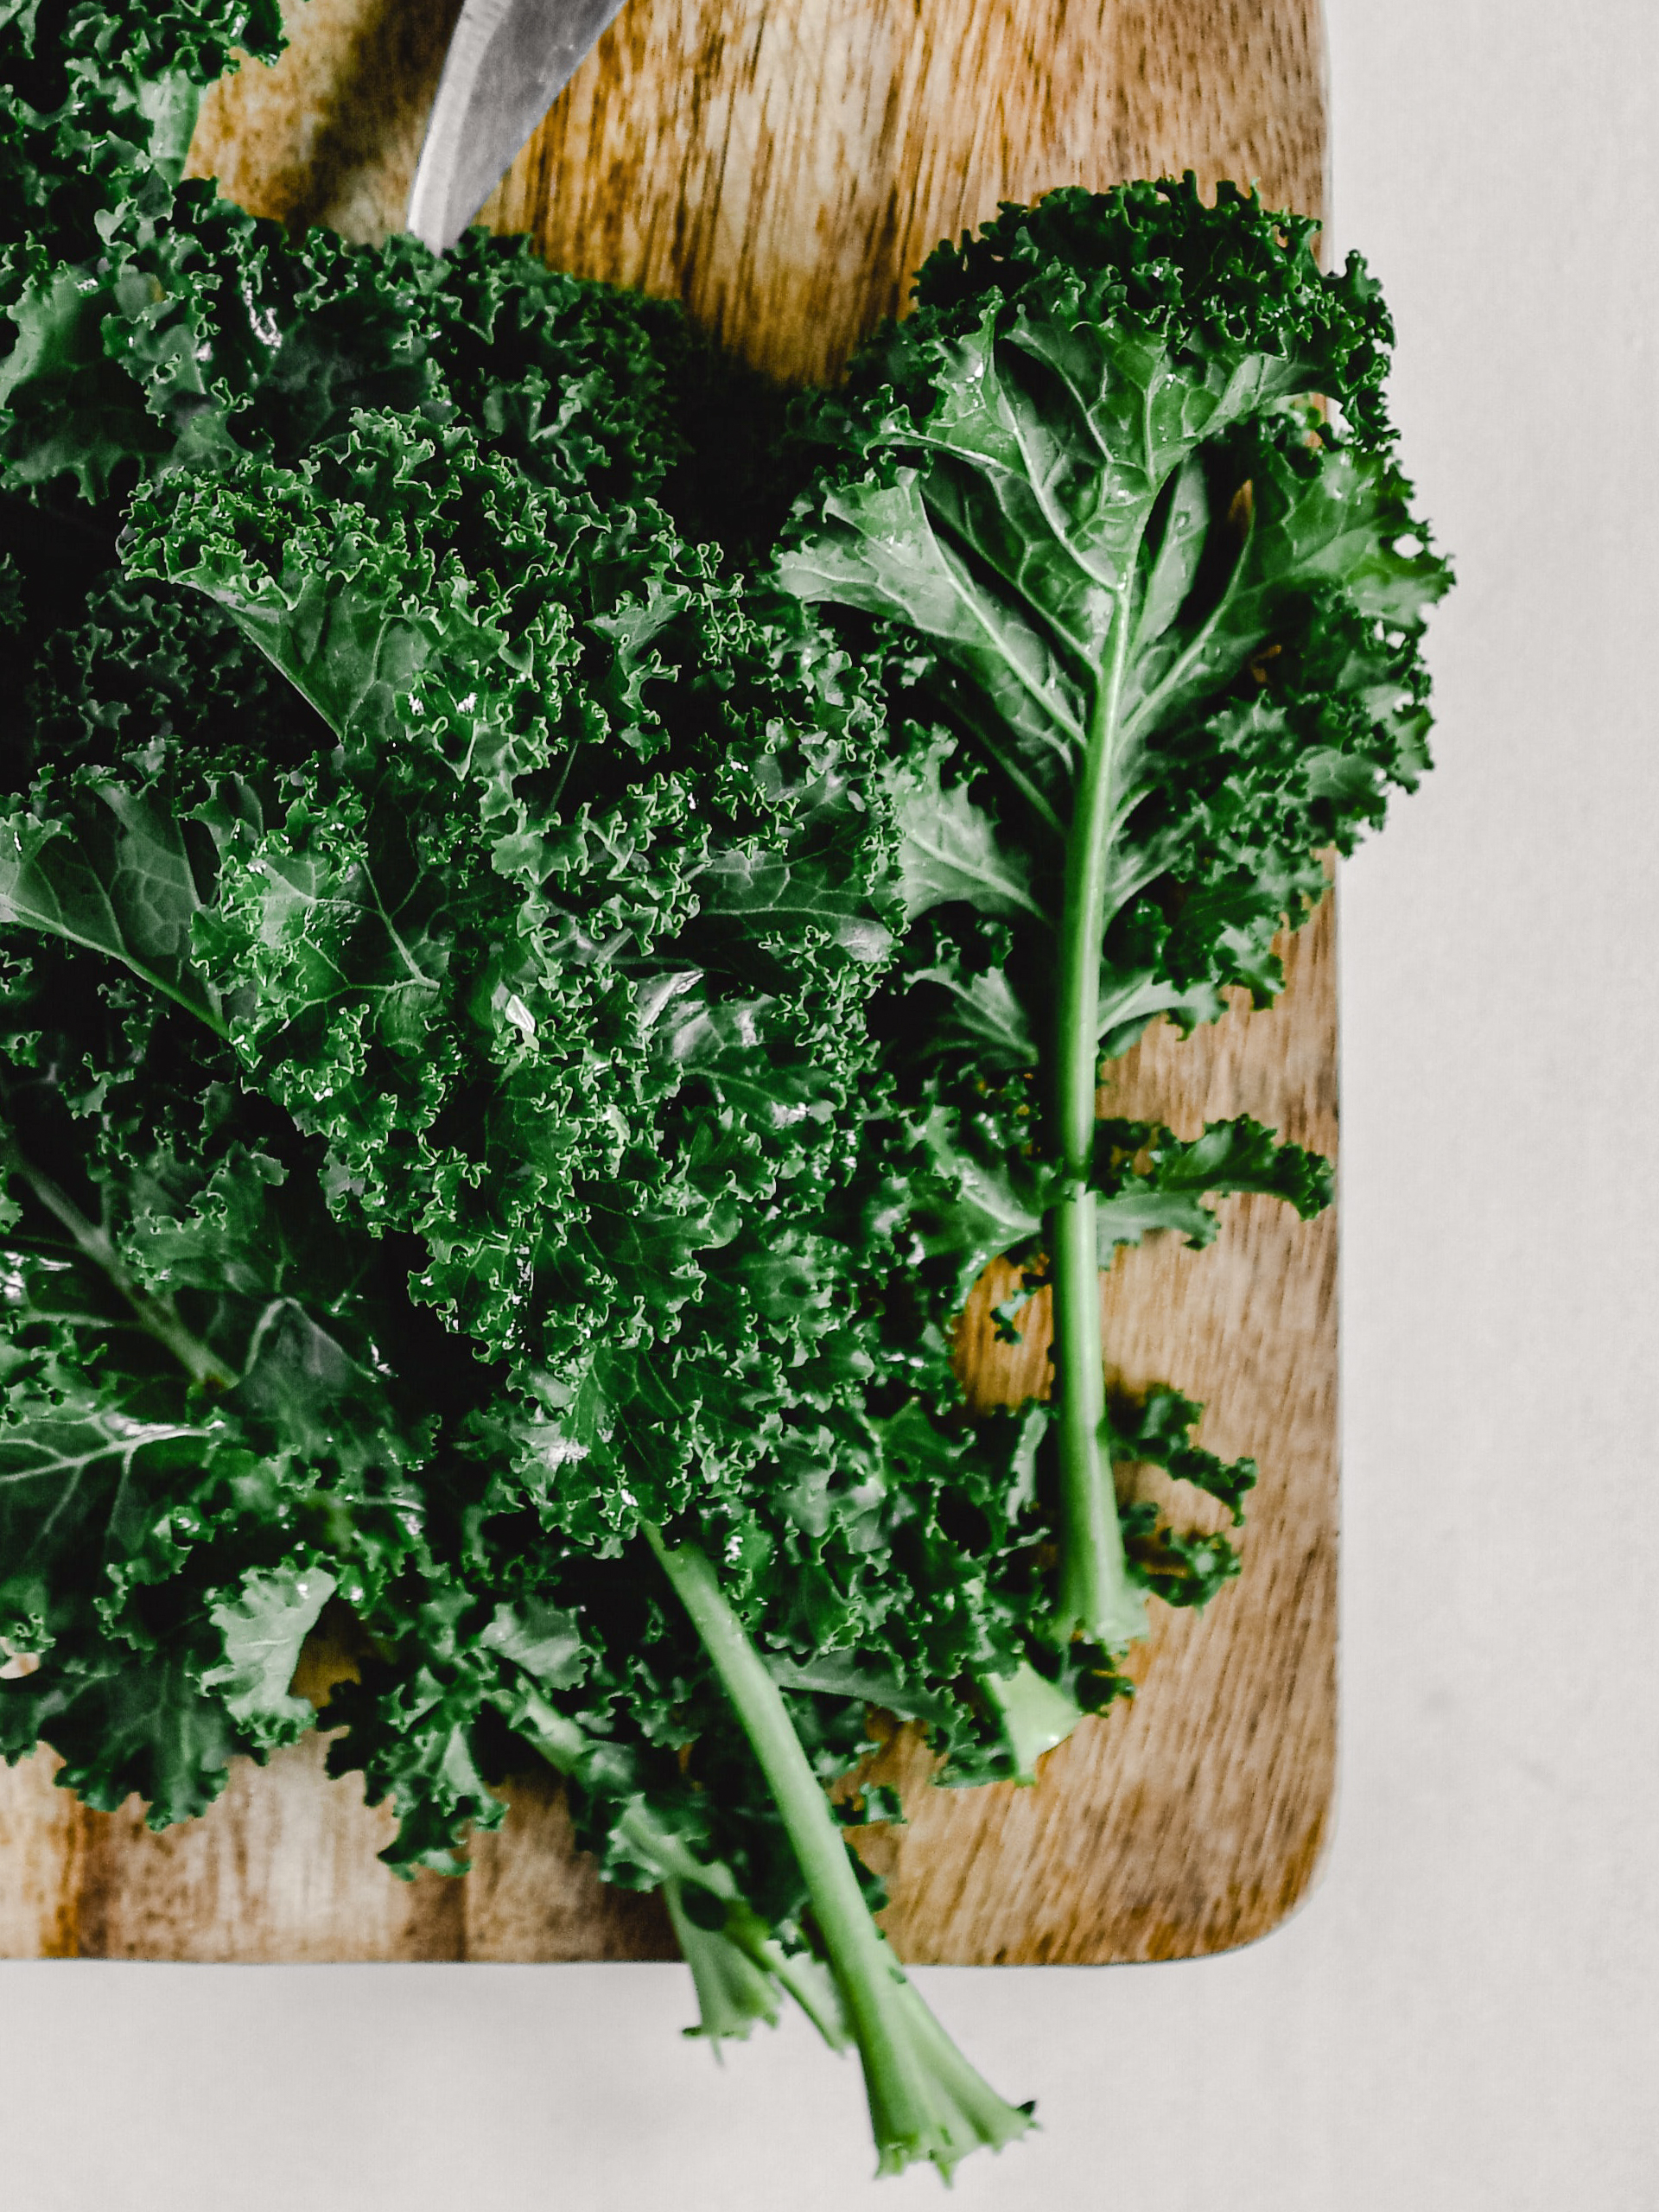 What Makes Kale a Superfood?